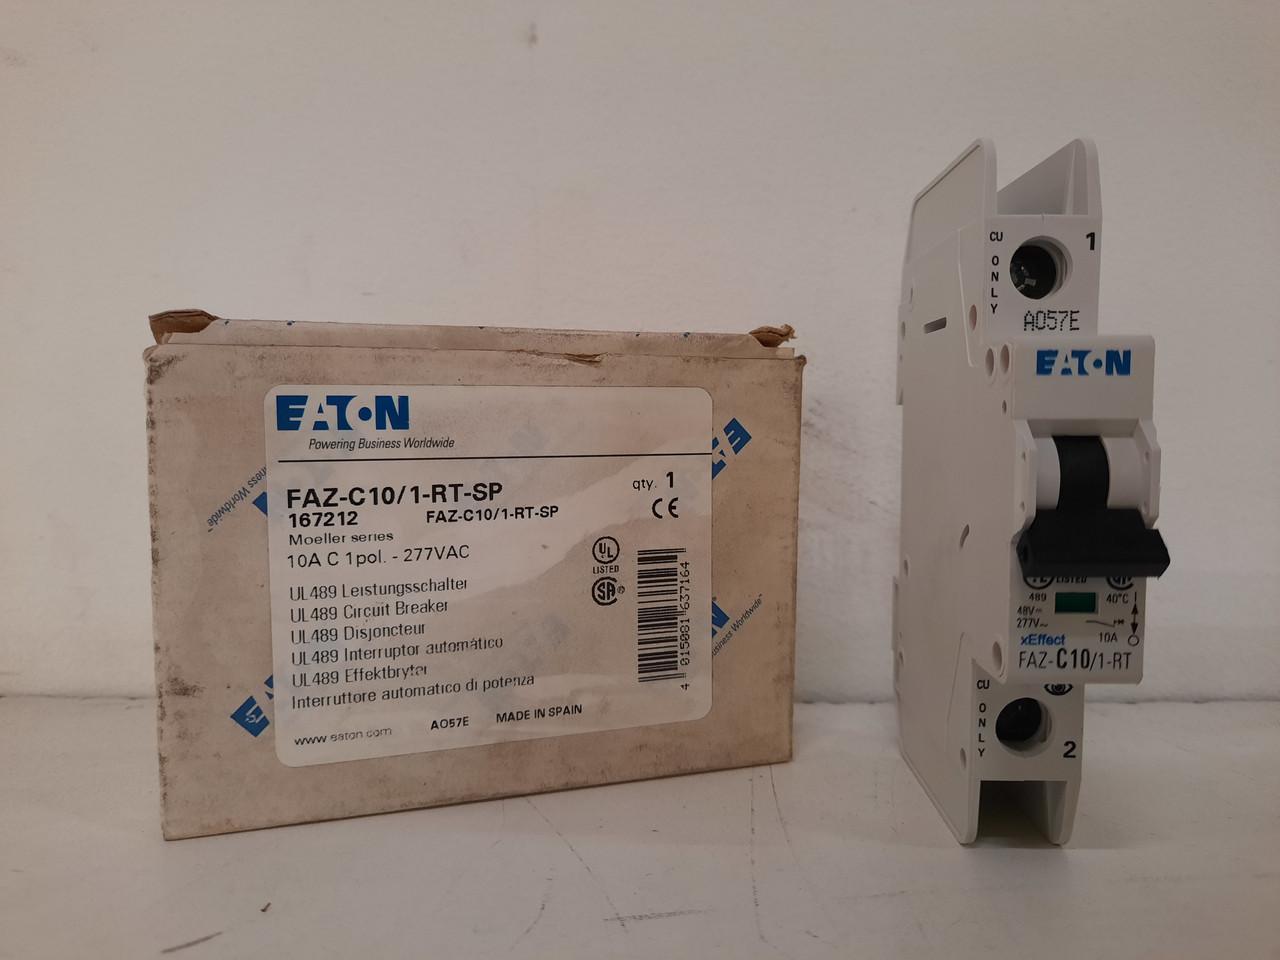 Eaton FAZ-C10/1-RT-SP 277/480 VAC 50/60 Hz, 10 A, 1-Pole, 10/14 kA, 5 to 10 x Rated Current, Ring Tongue Terminal, DIN Rail Mount, Single Packaging, C-Curve, Current Limiting, Thermal Magnetic